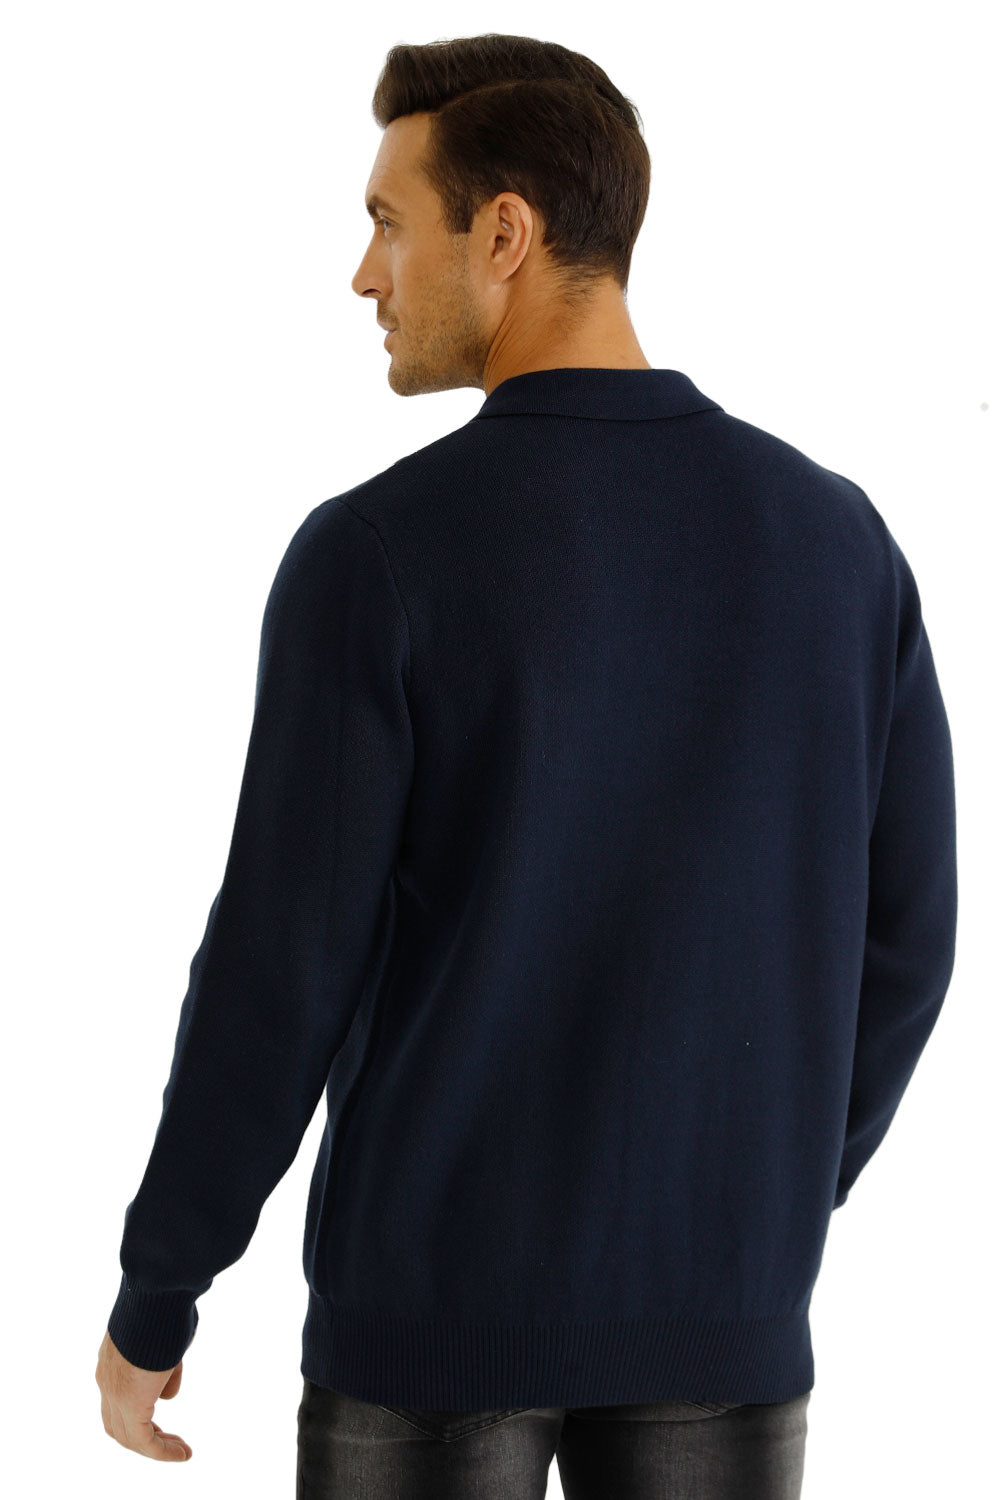 Gingtto Mens Long Sleeve Casual Button Knitted Slim Fit Sweaters